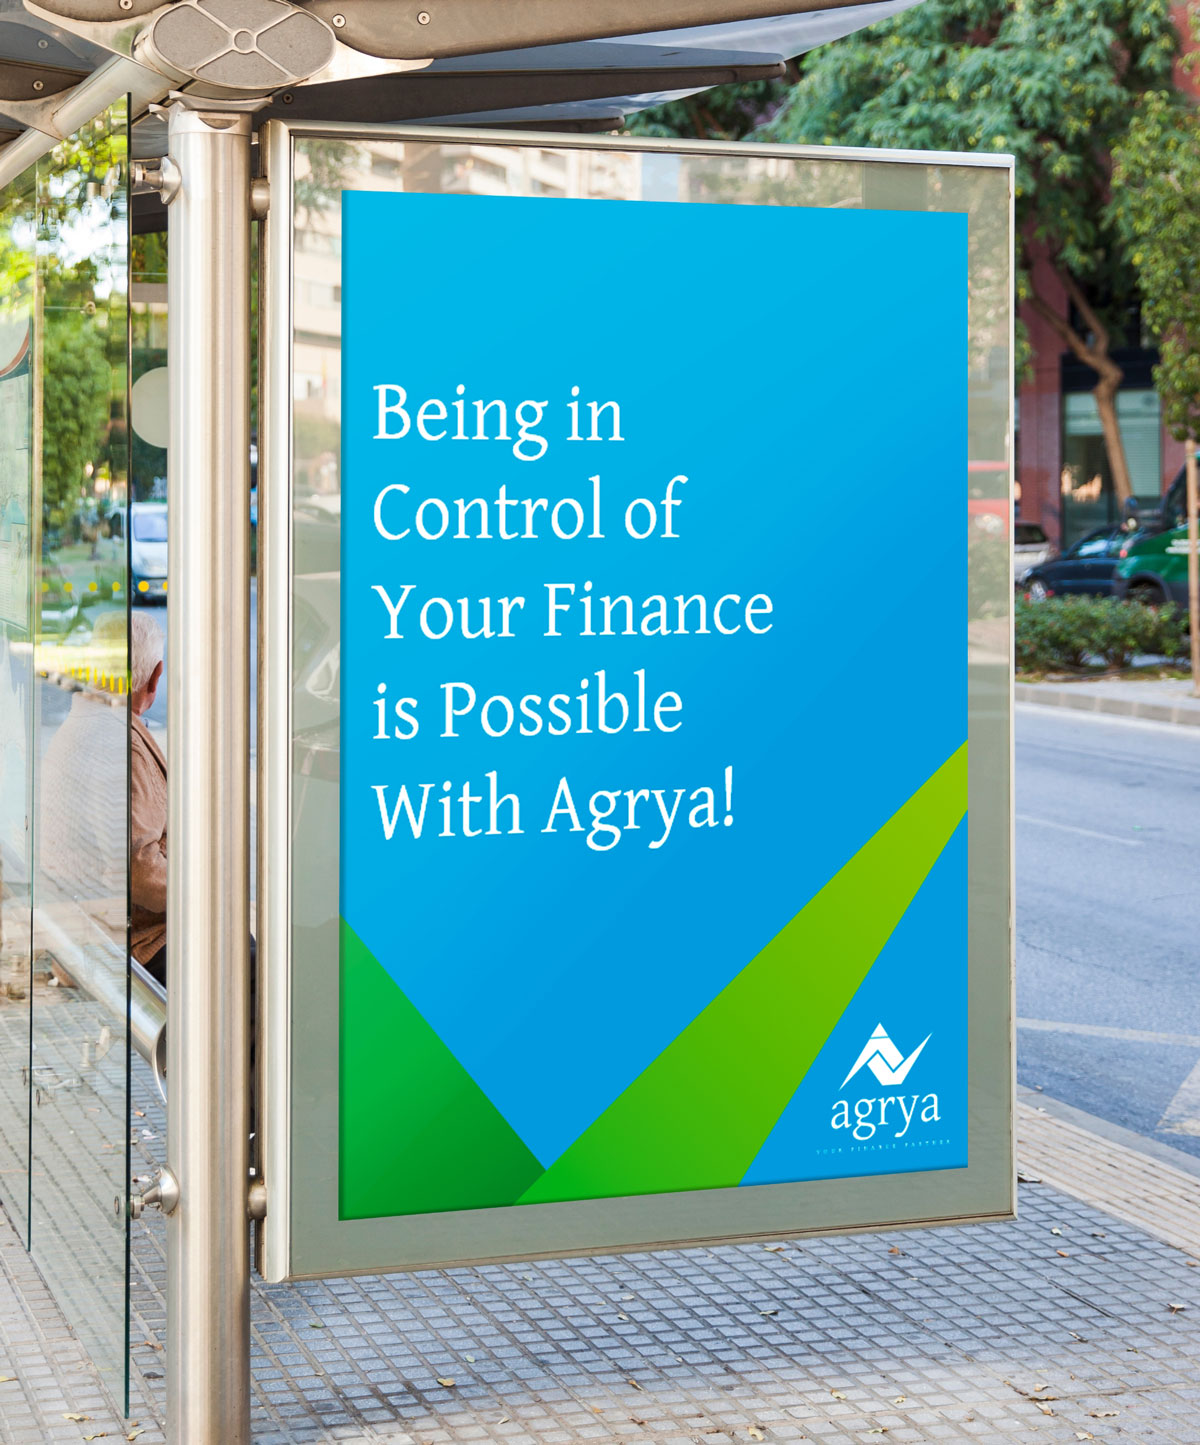 signboard-outdoor-signs-brand-icon-design-marketing-communication-collateral-finance-consulting-agrya-reinaphics-chennai